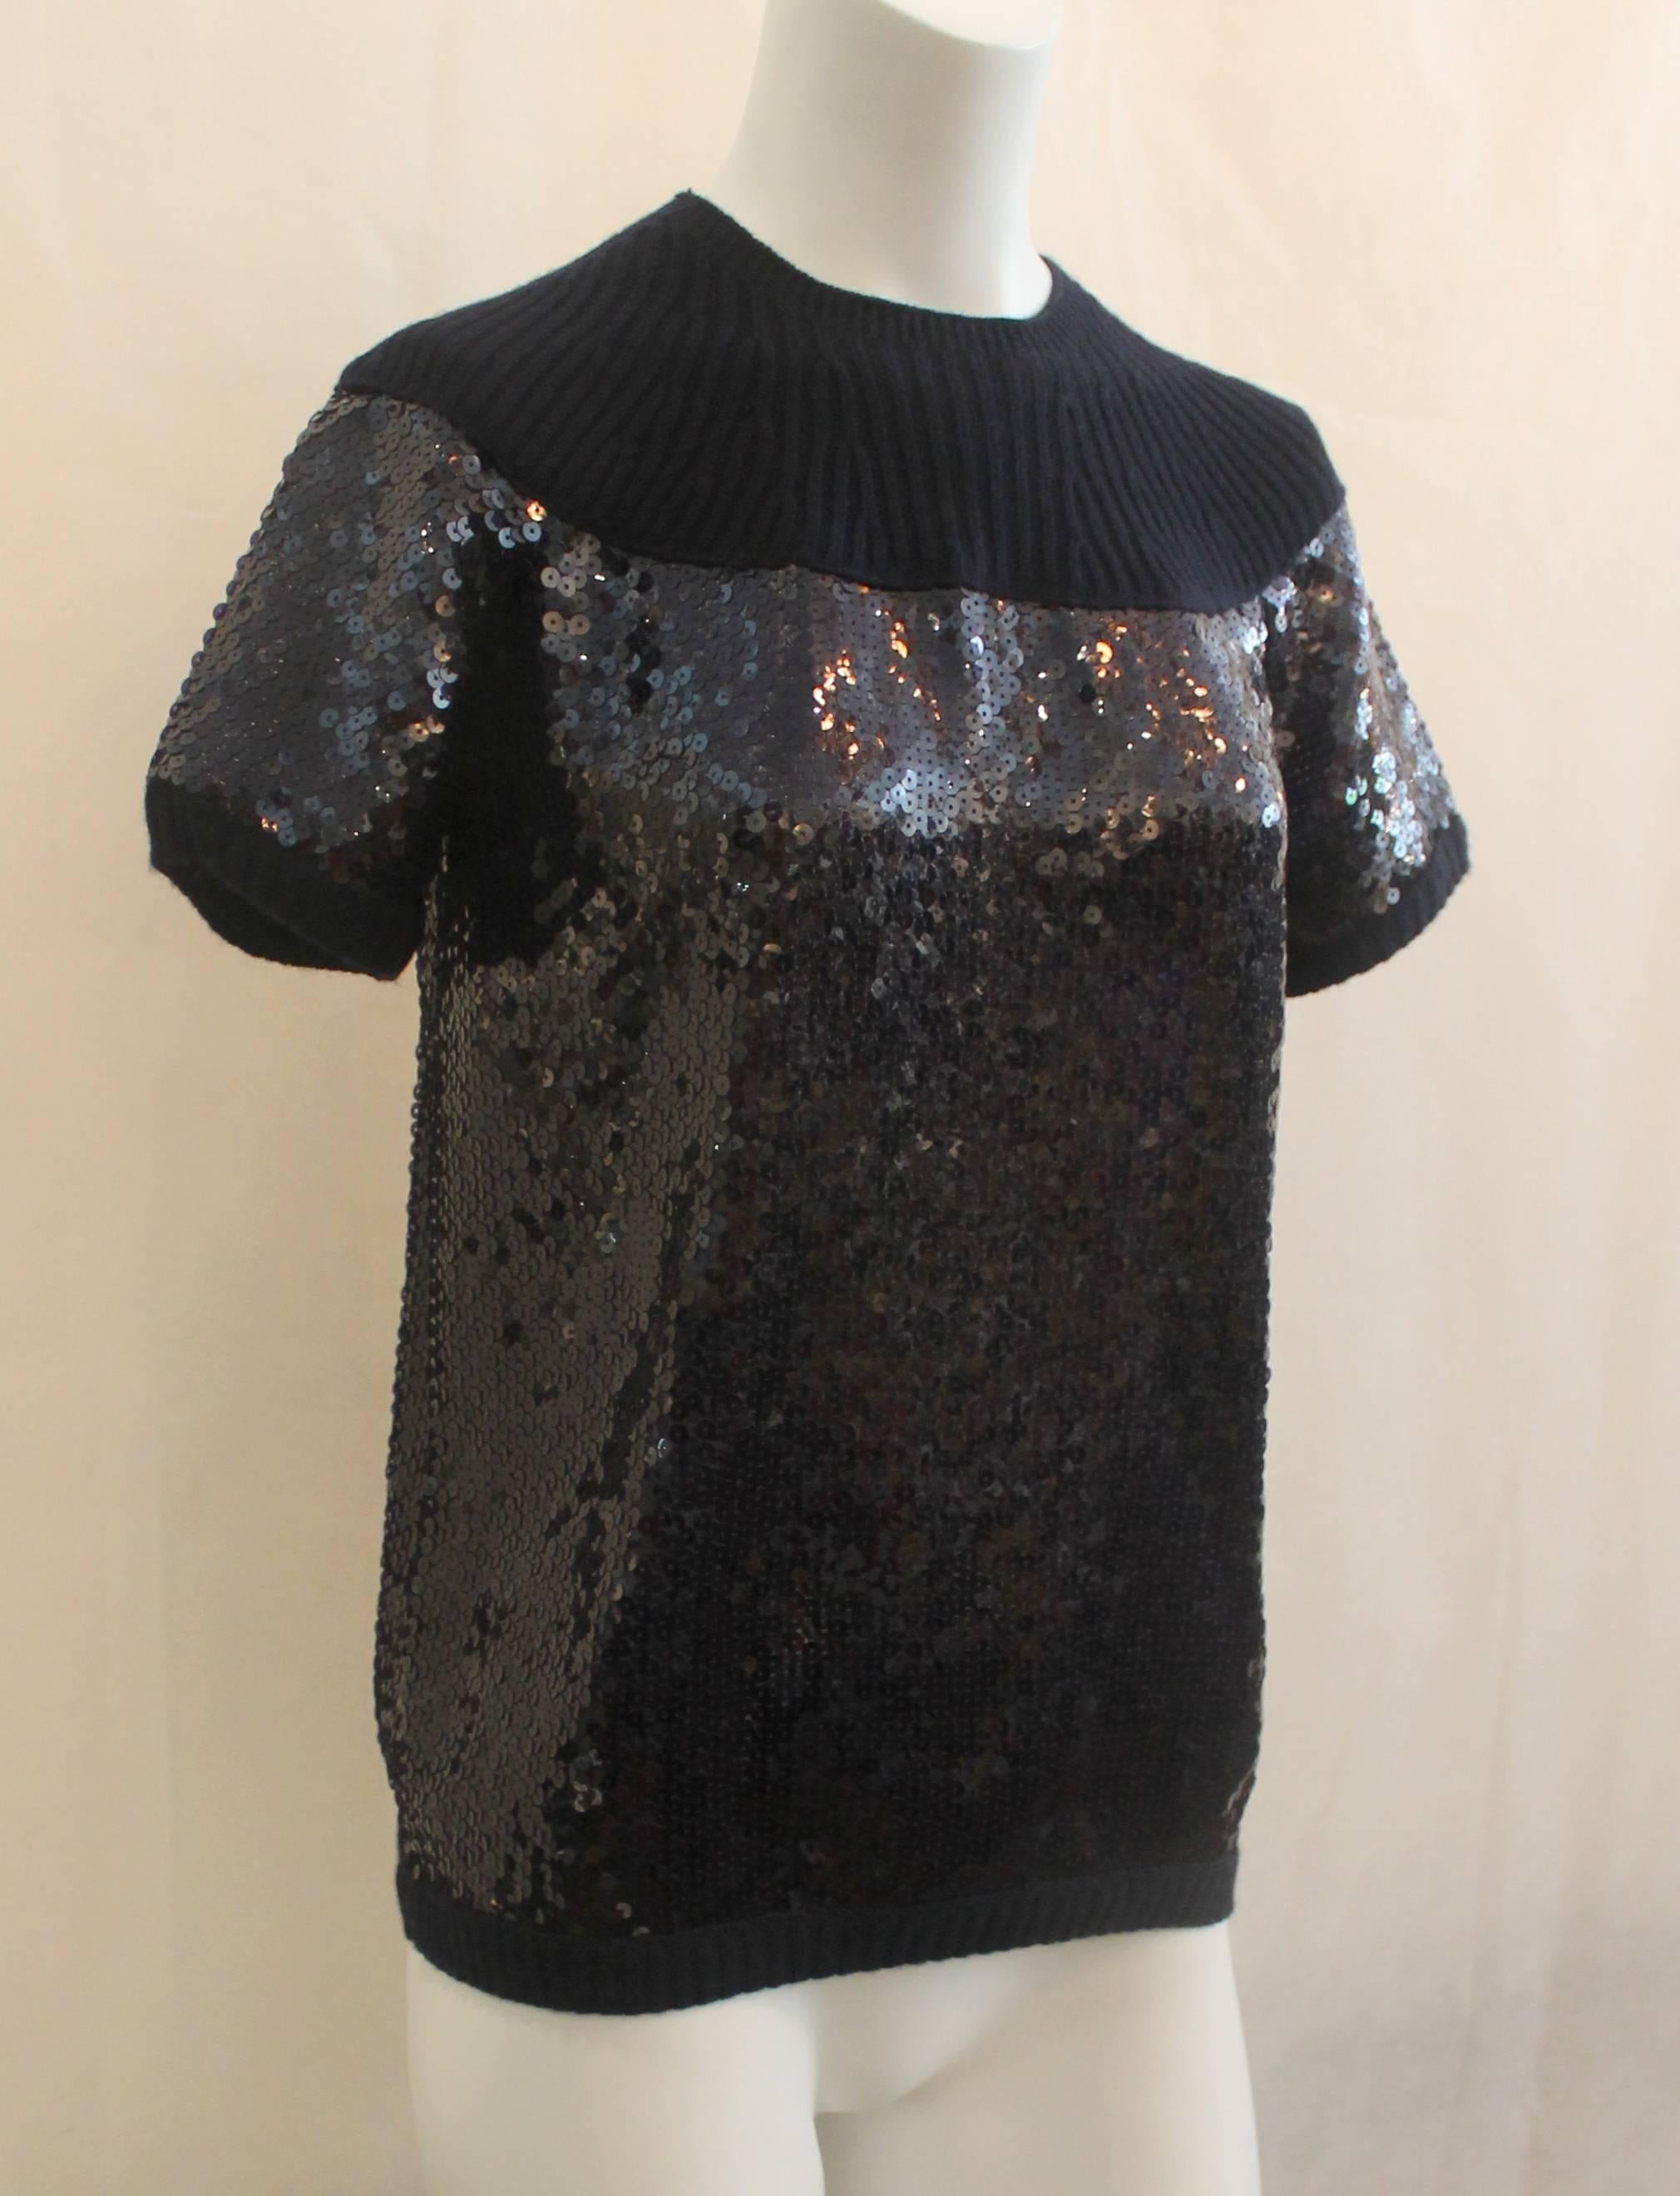 Chanel Navy Cashmere Sequin Short Sleeve Blouse - 40. This blouse is in excellent condition and is a great dressy piece. It features ribbed cashmere and a side zipper.

Measurements:
Bust- 18